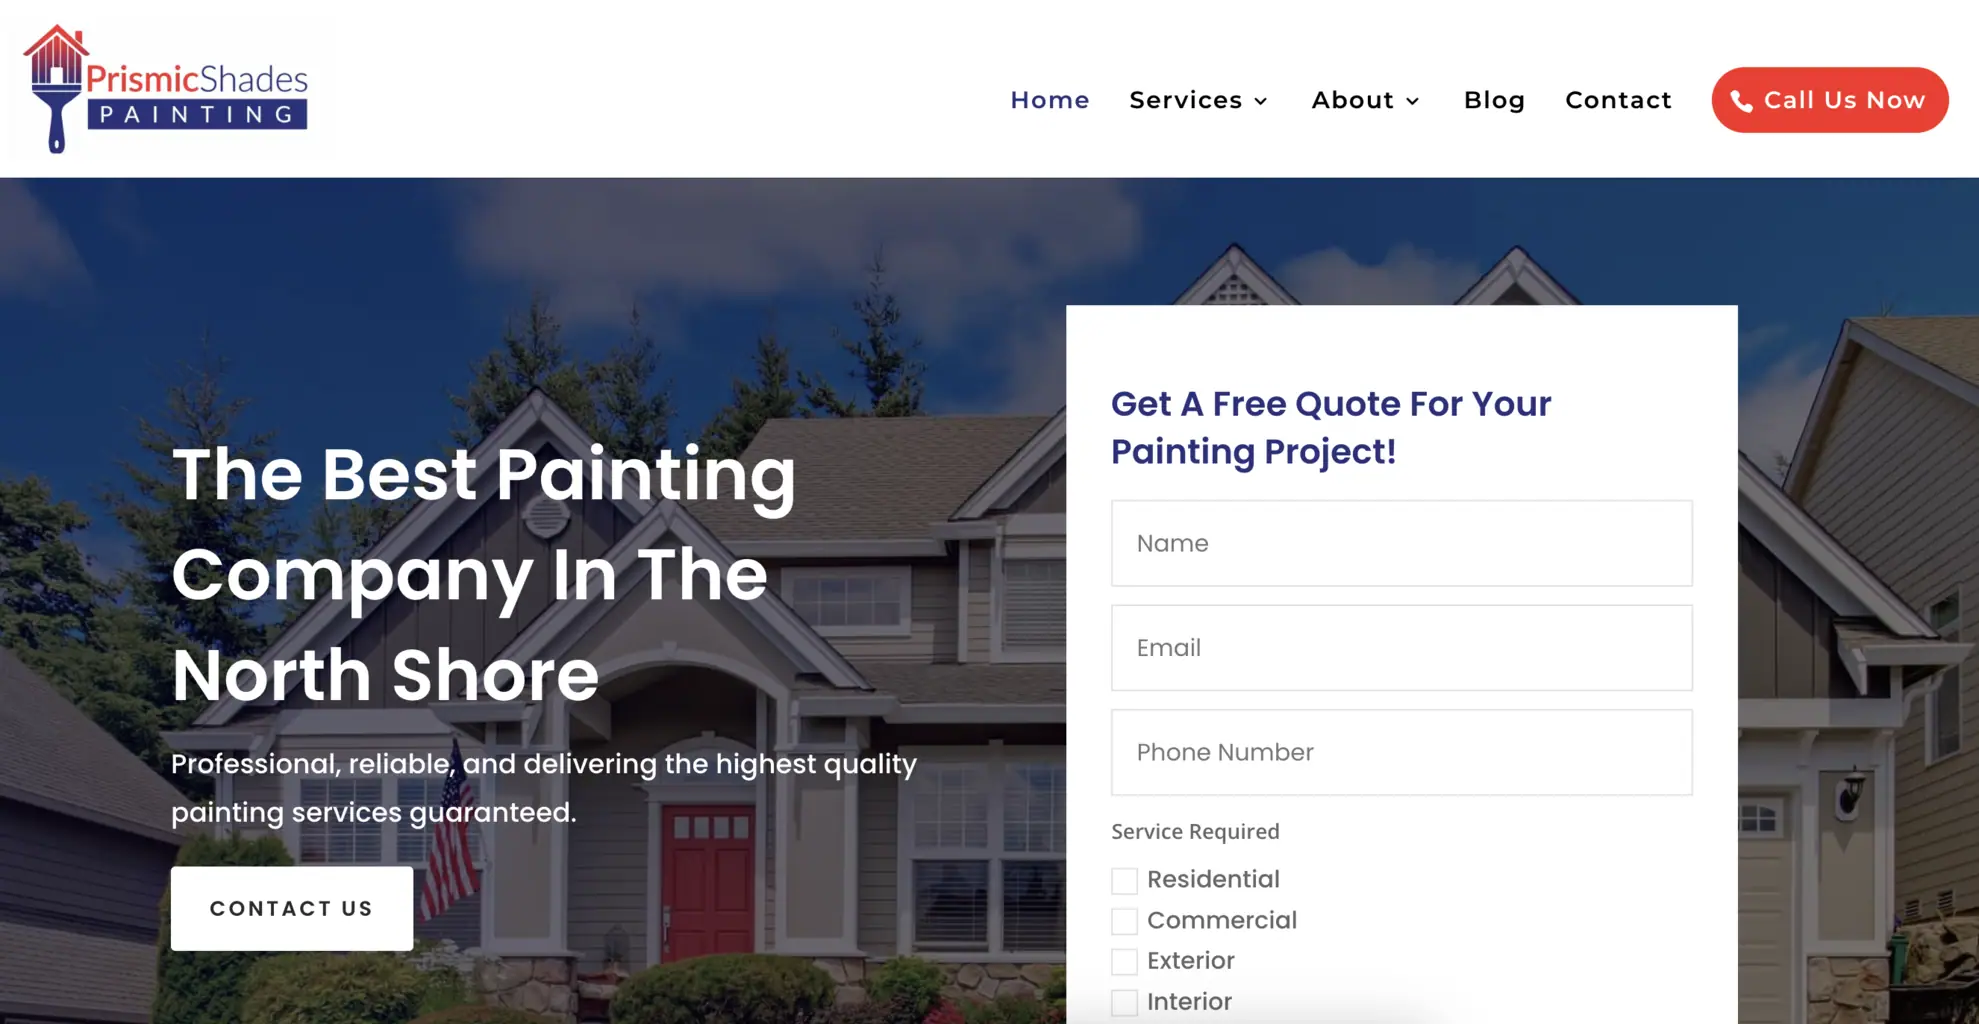 Prismic Shades Painting website design by business all in one marketing solutions